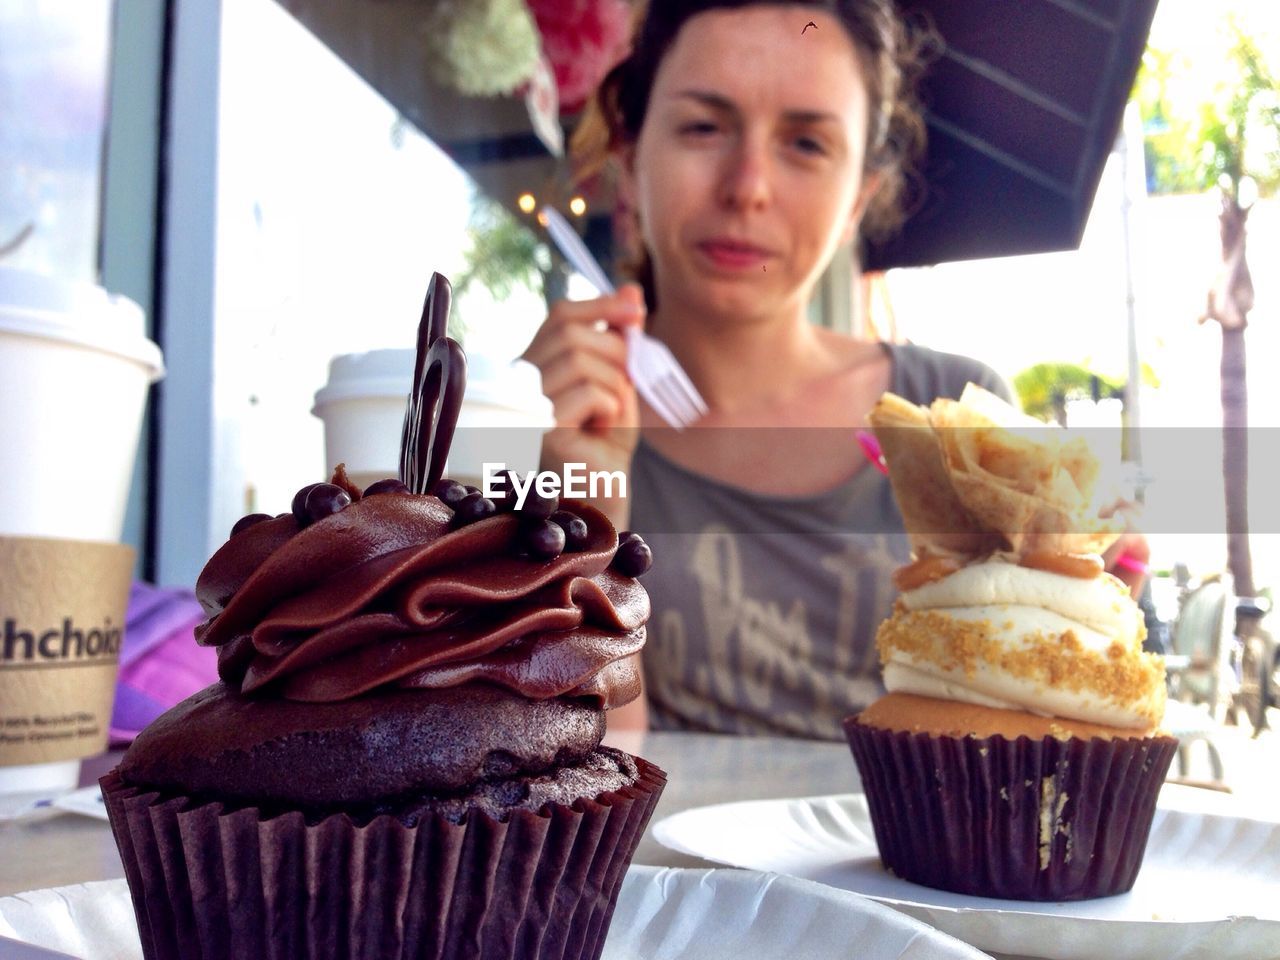 Portrait of woman having cupcakes at outdoor cafe